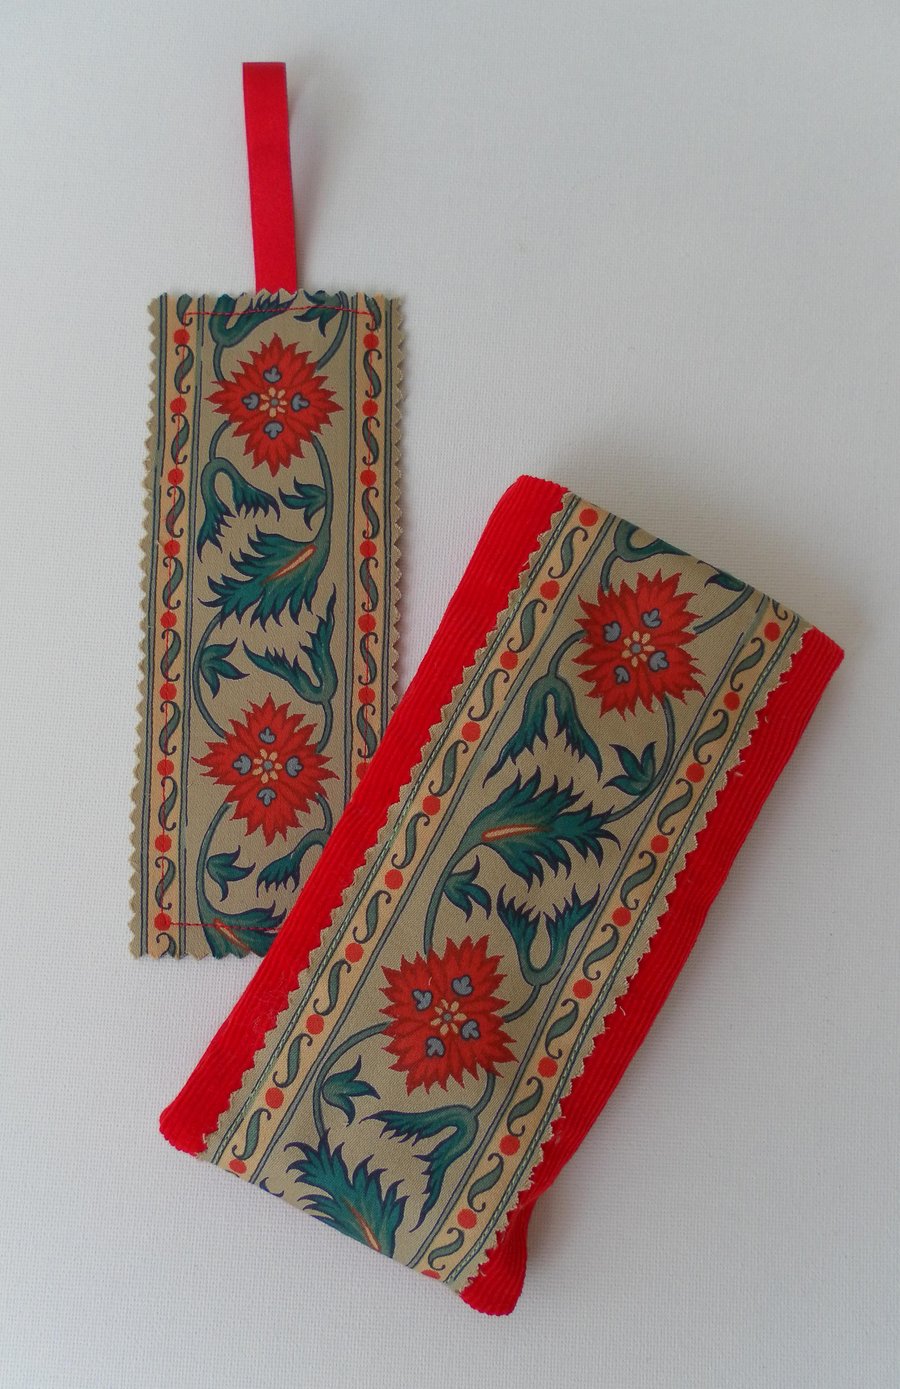 Glasses case and bookmark set, red with appliquéd panel